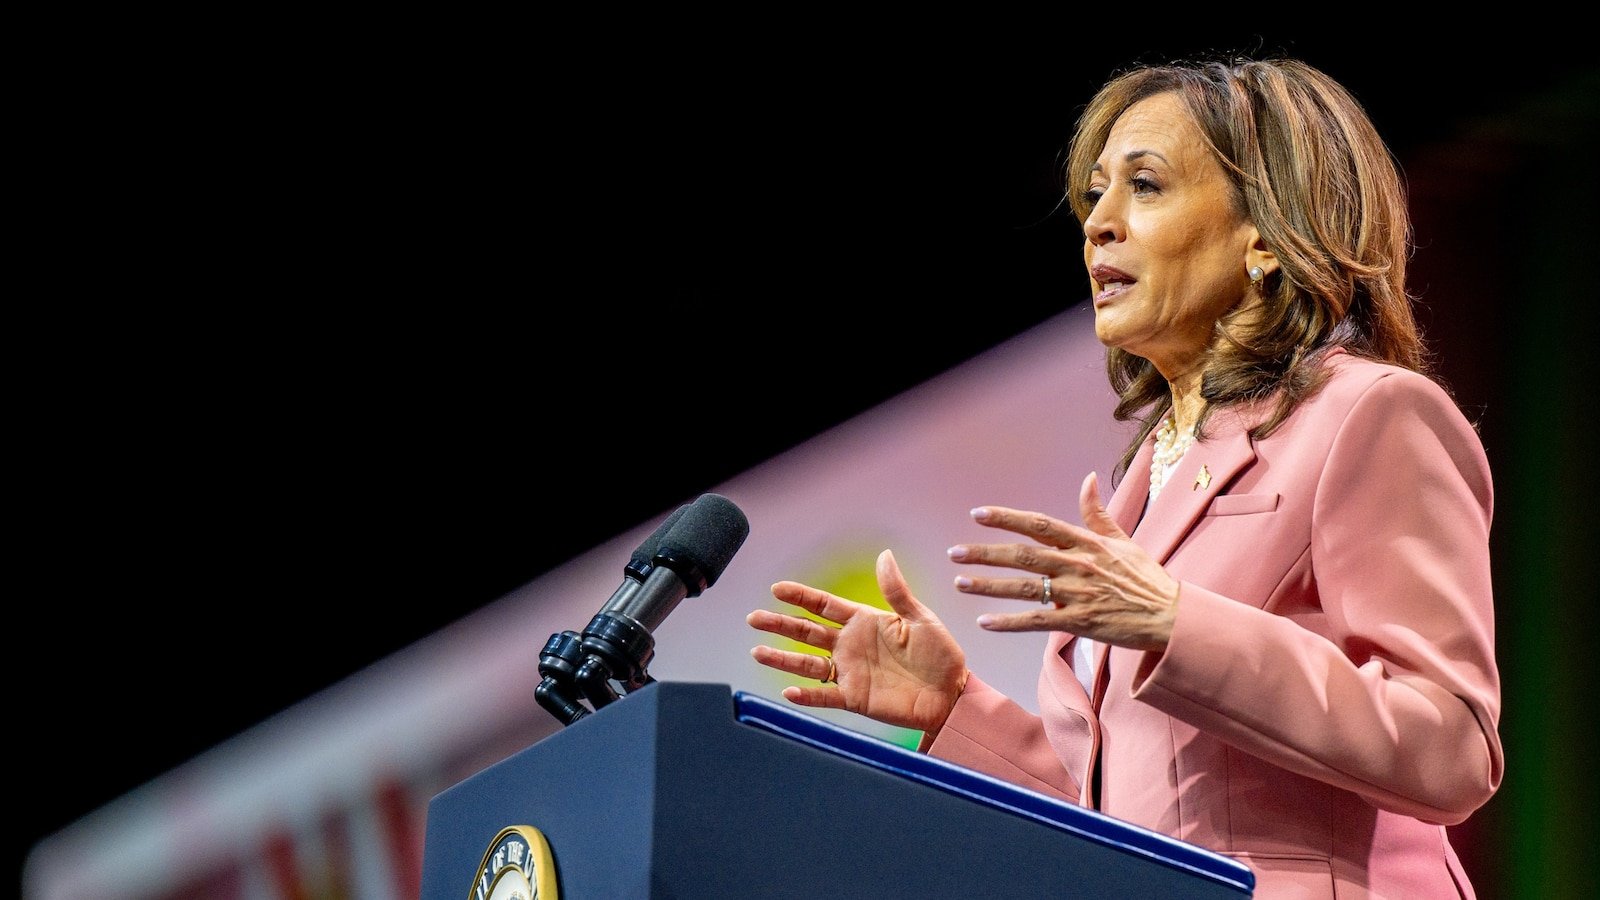 Biden campaign is polling on Harris' strength against Trump